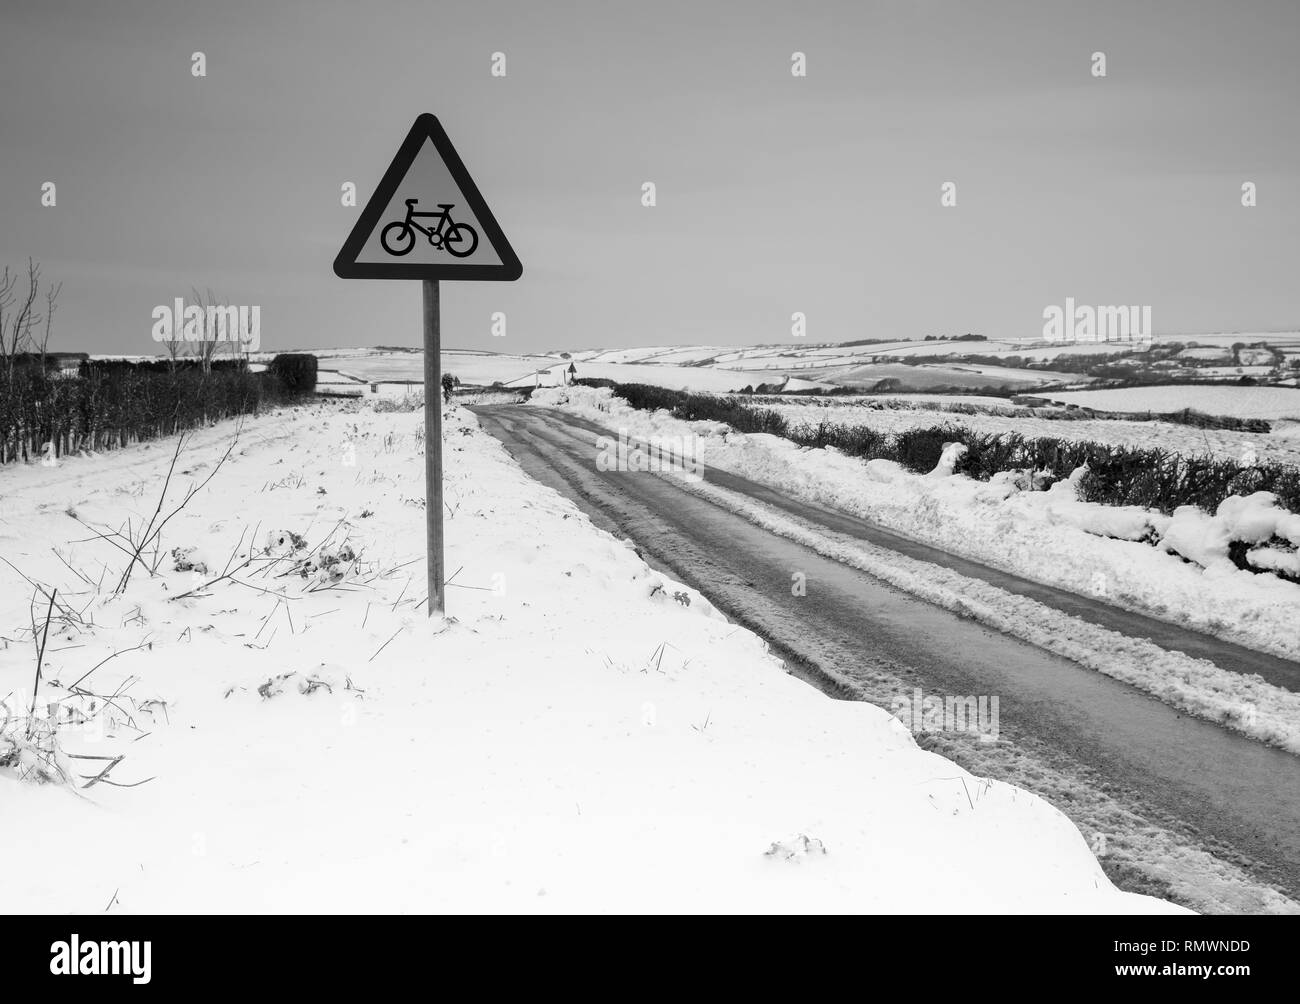 A bike lane sign standing by a snow ccovered roadside in Salcombe, Devon Stock Photo